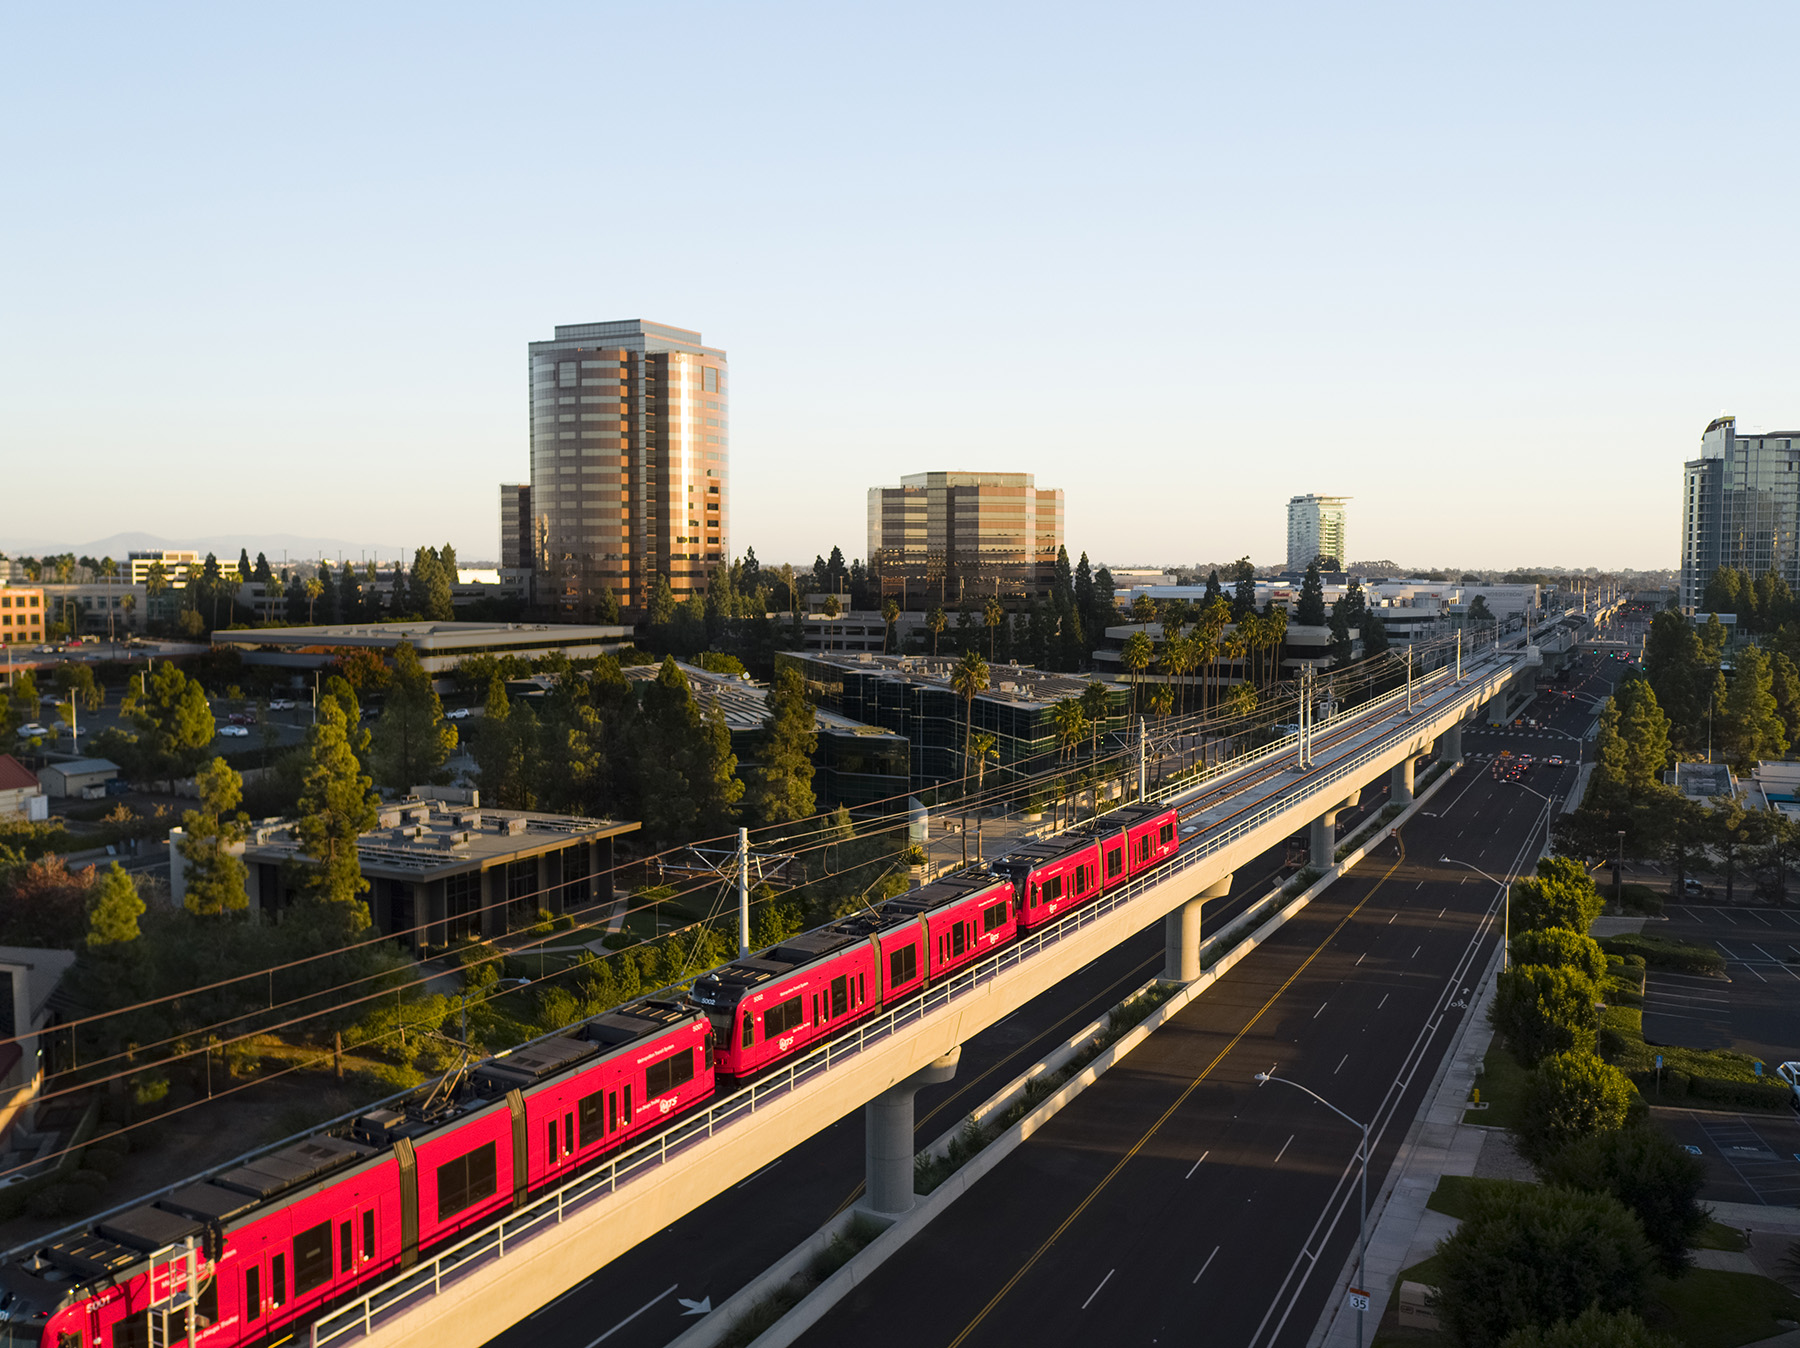 Red train moves along train tracks amidst a city scape